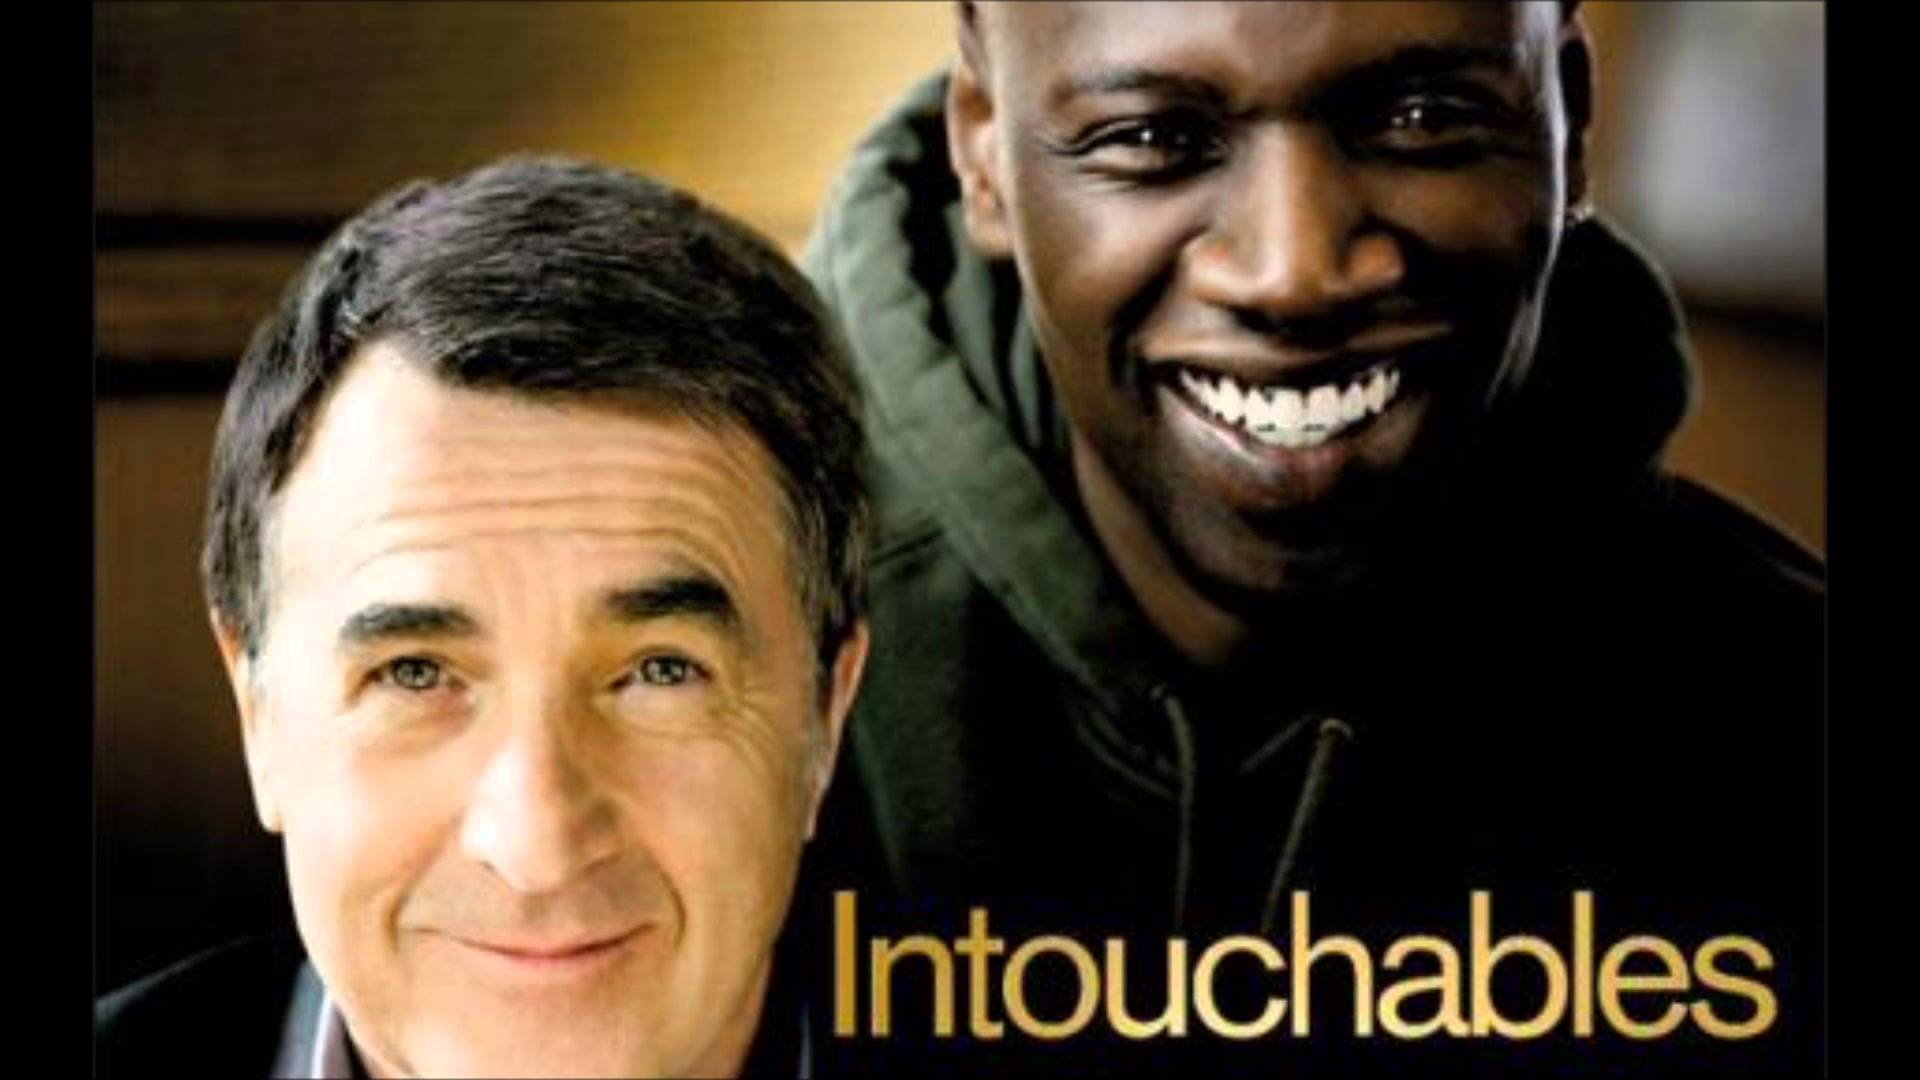 Intouchables Wallpaper Image